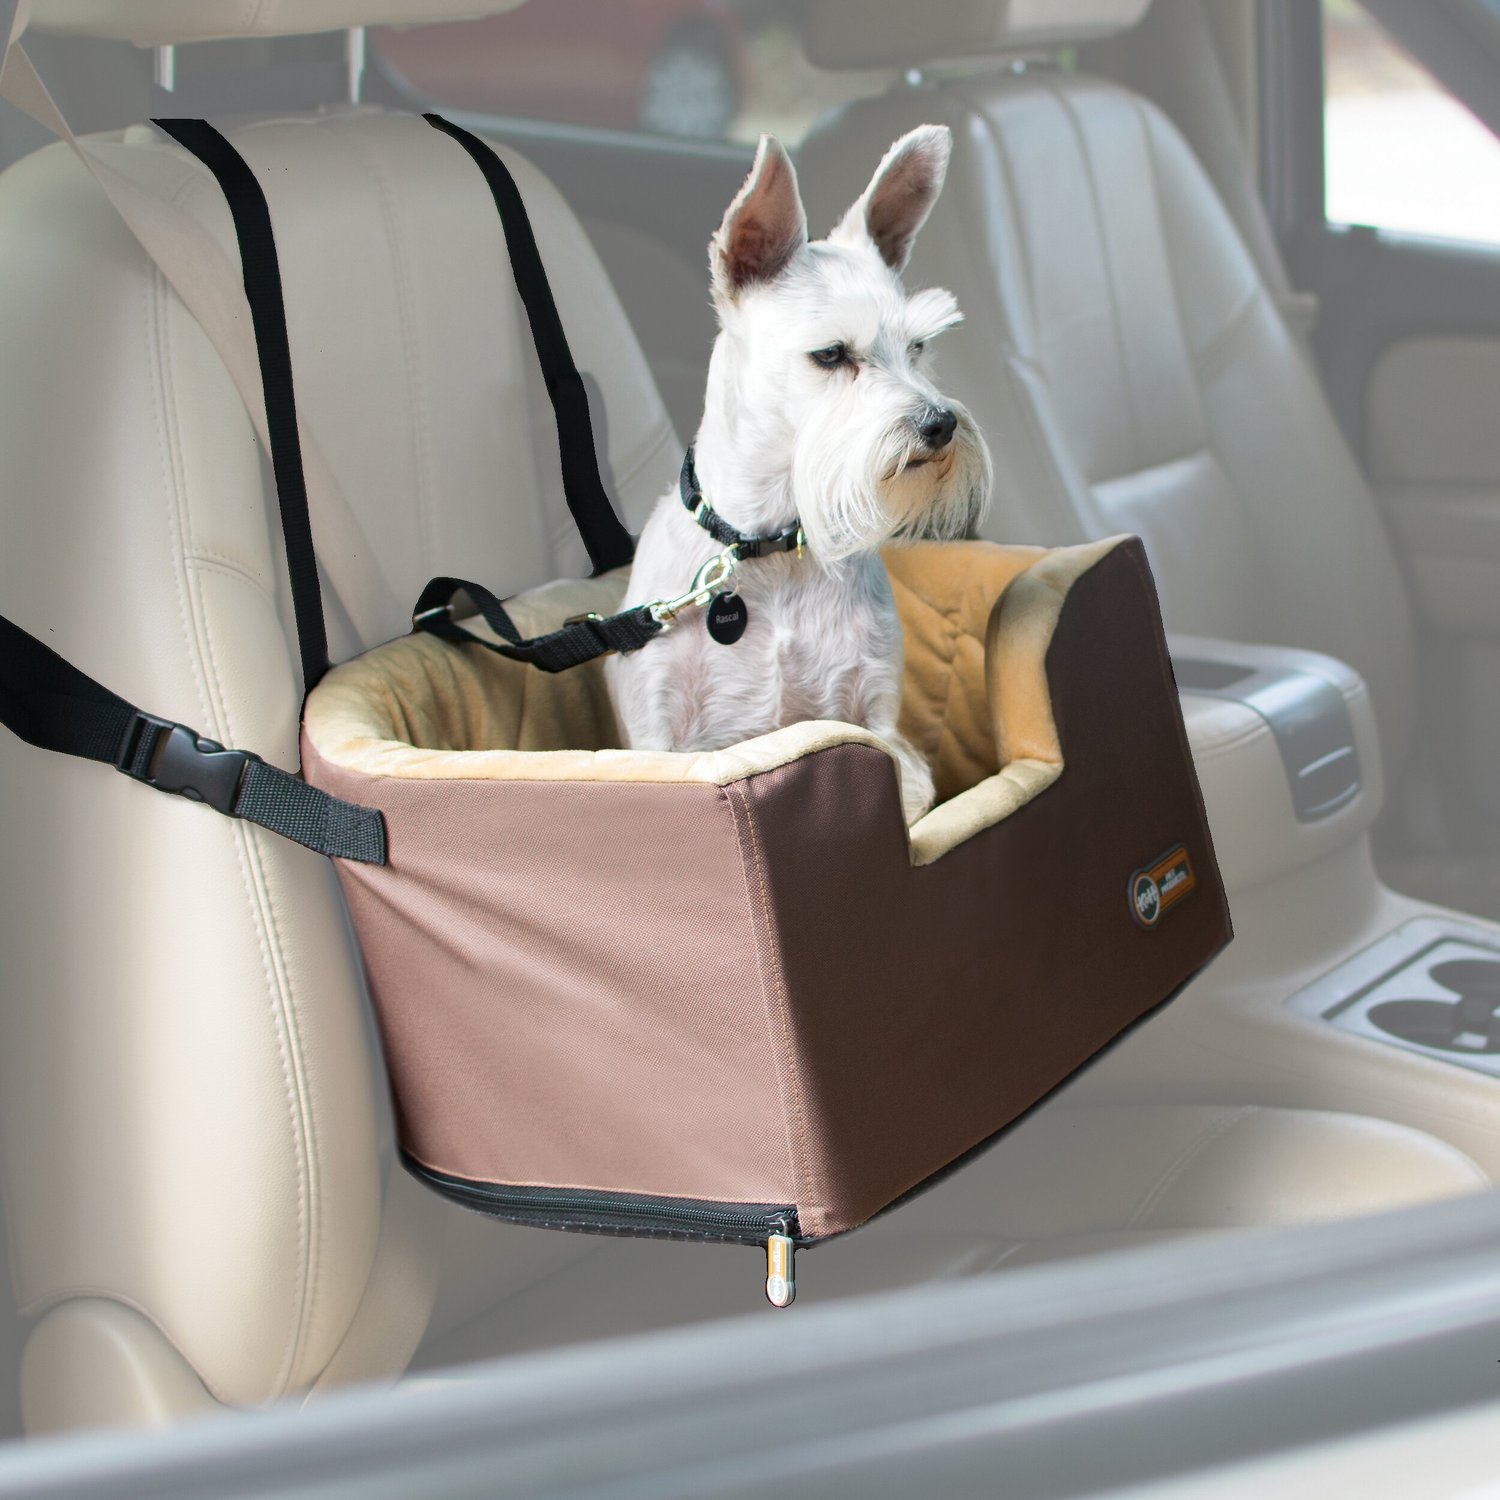 chewy car seats for dogs